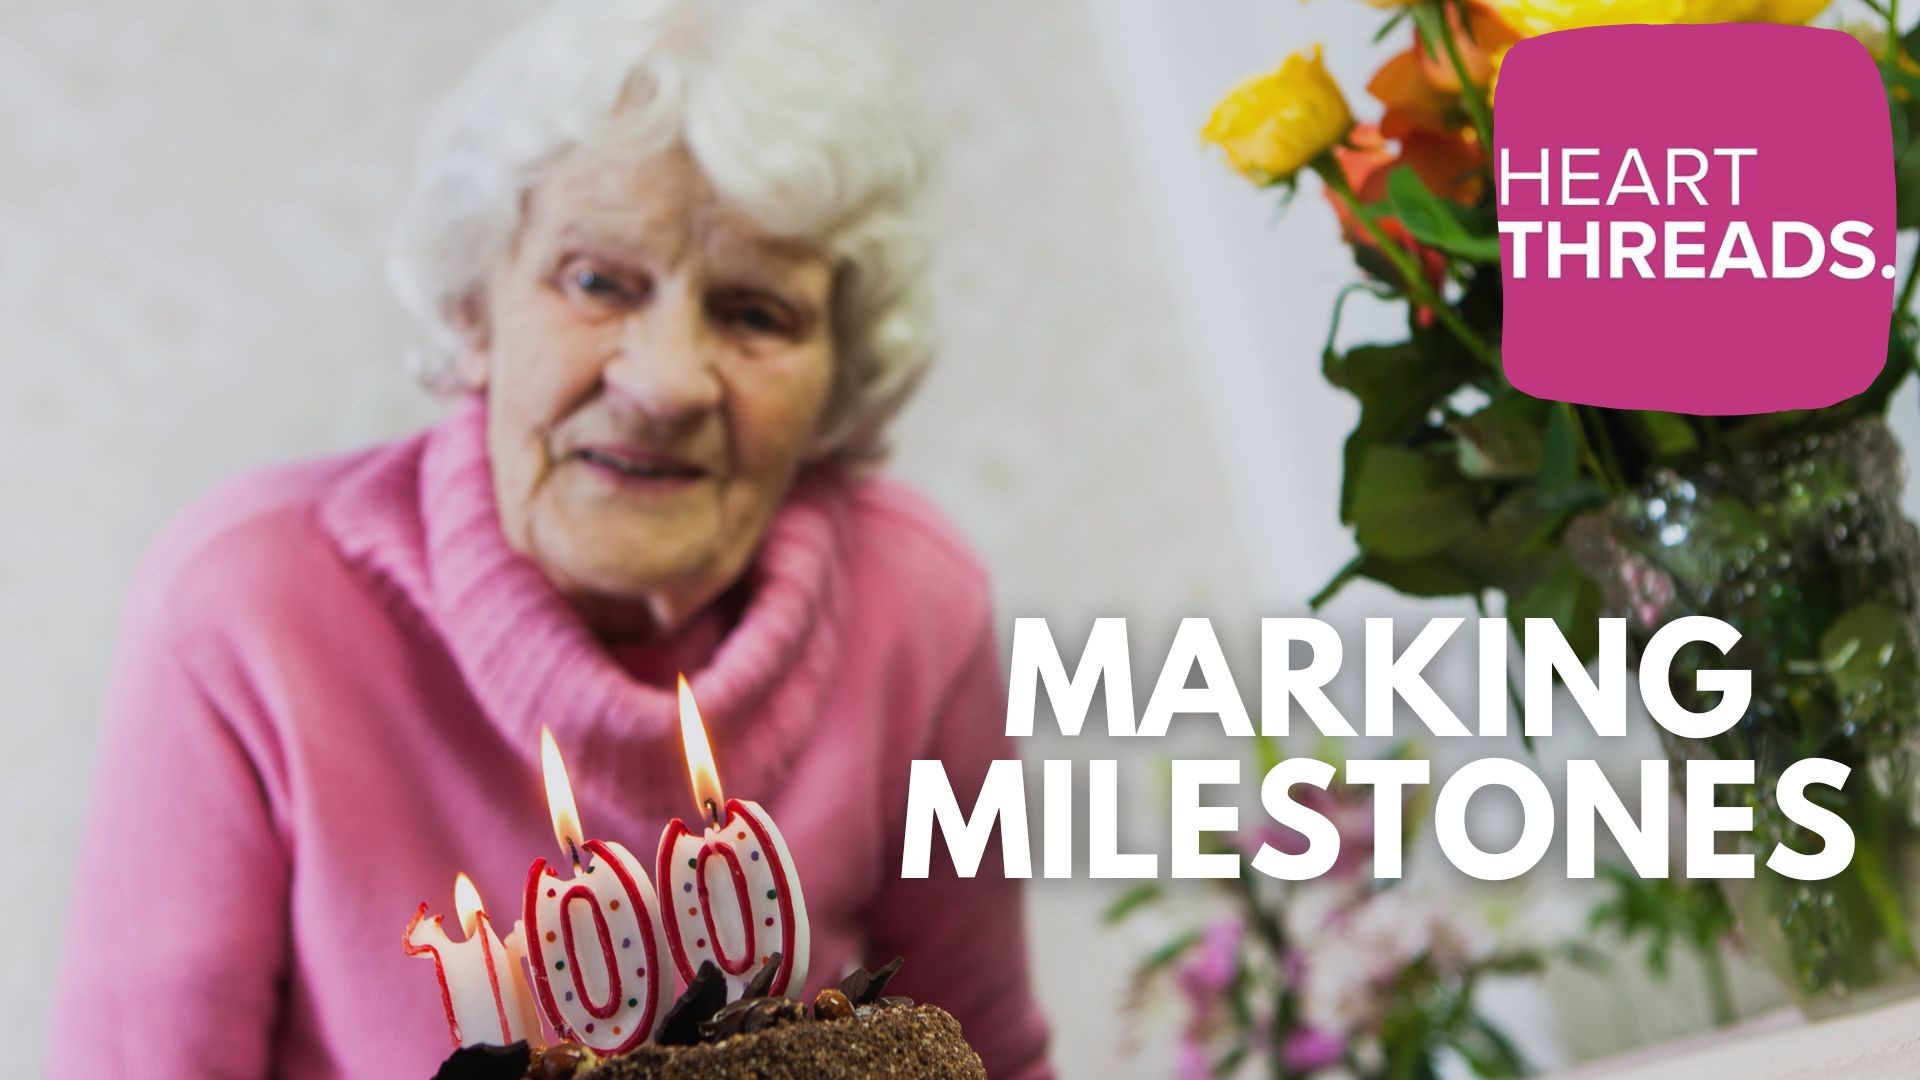 Heartwarming stories that celebrate the milestones of life. From 100th birthdays to retirement, we share inspirational stories of living life to the fullest.